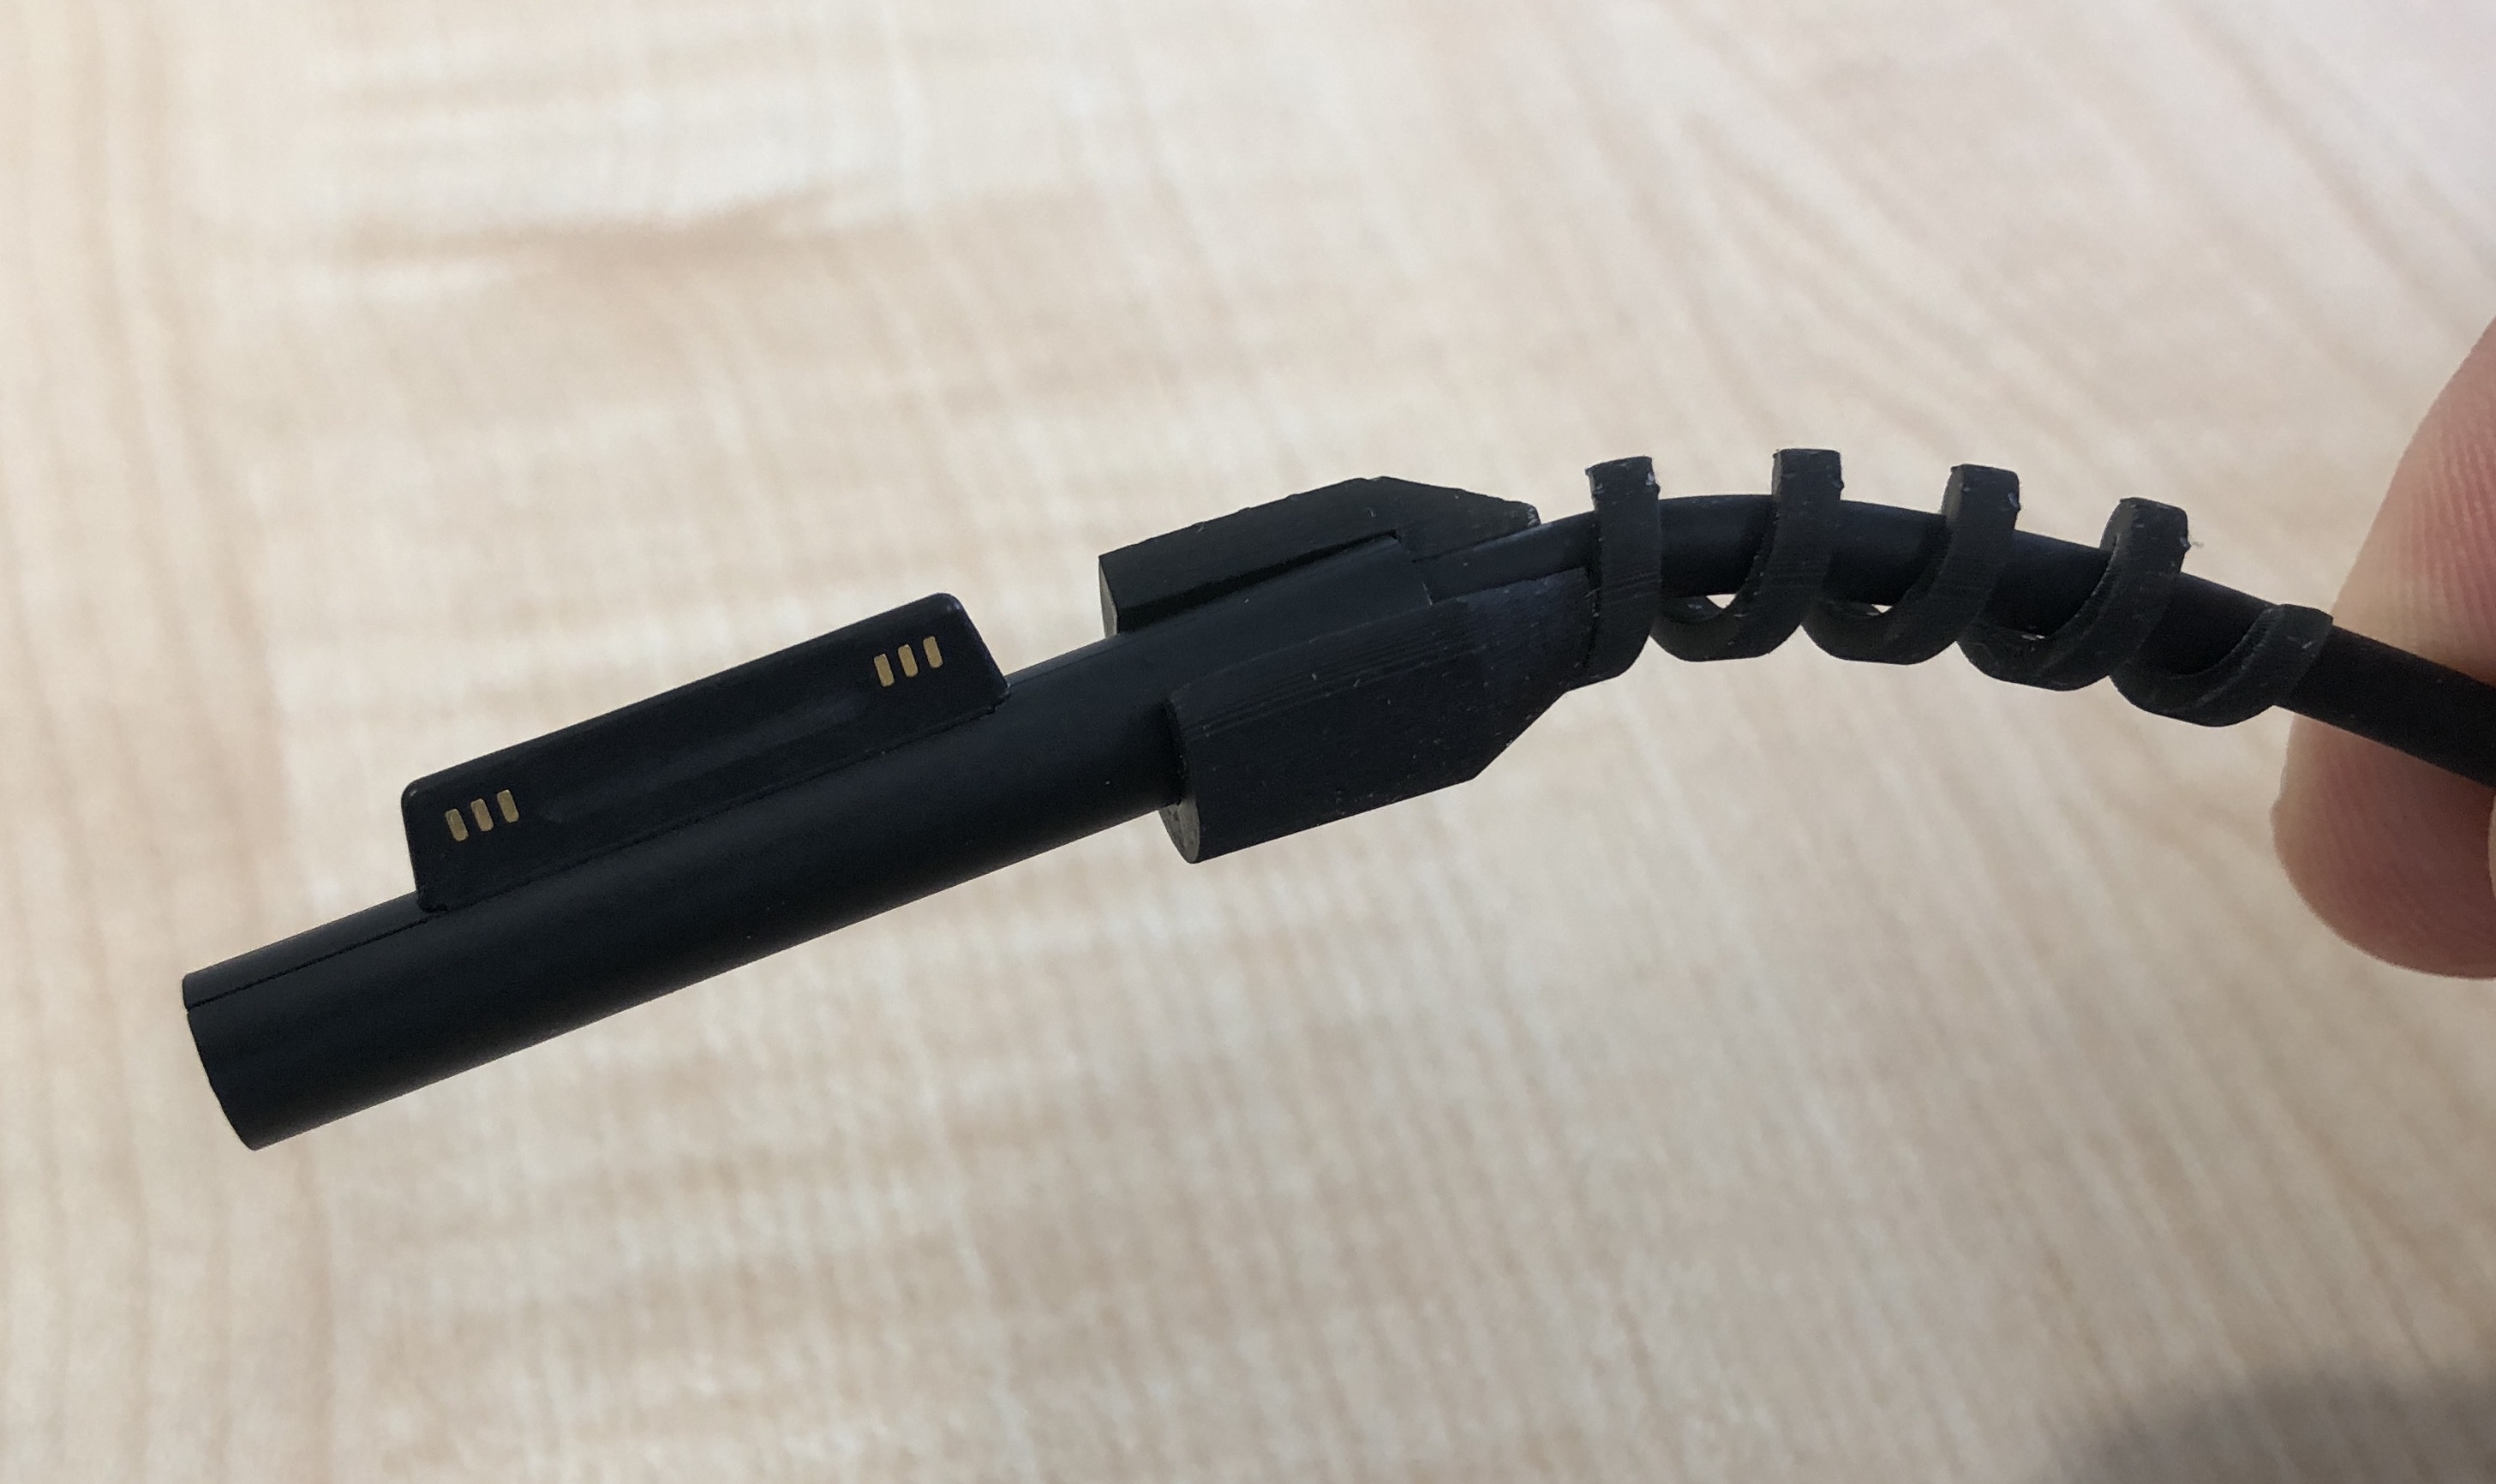 Surface Pro 6 charging cable with 3D printed strain relief